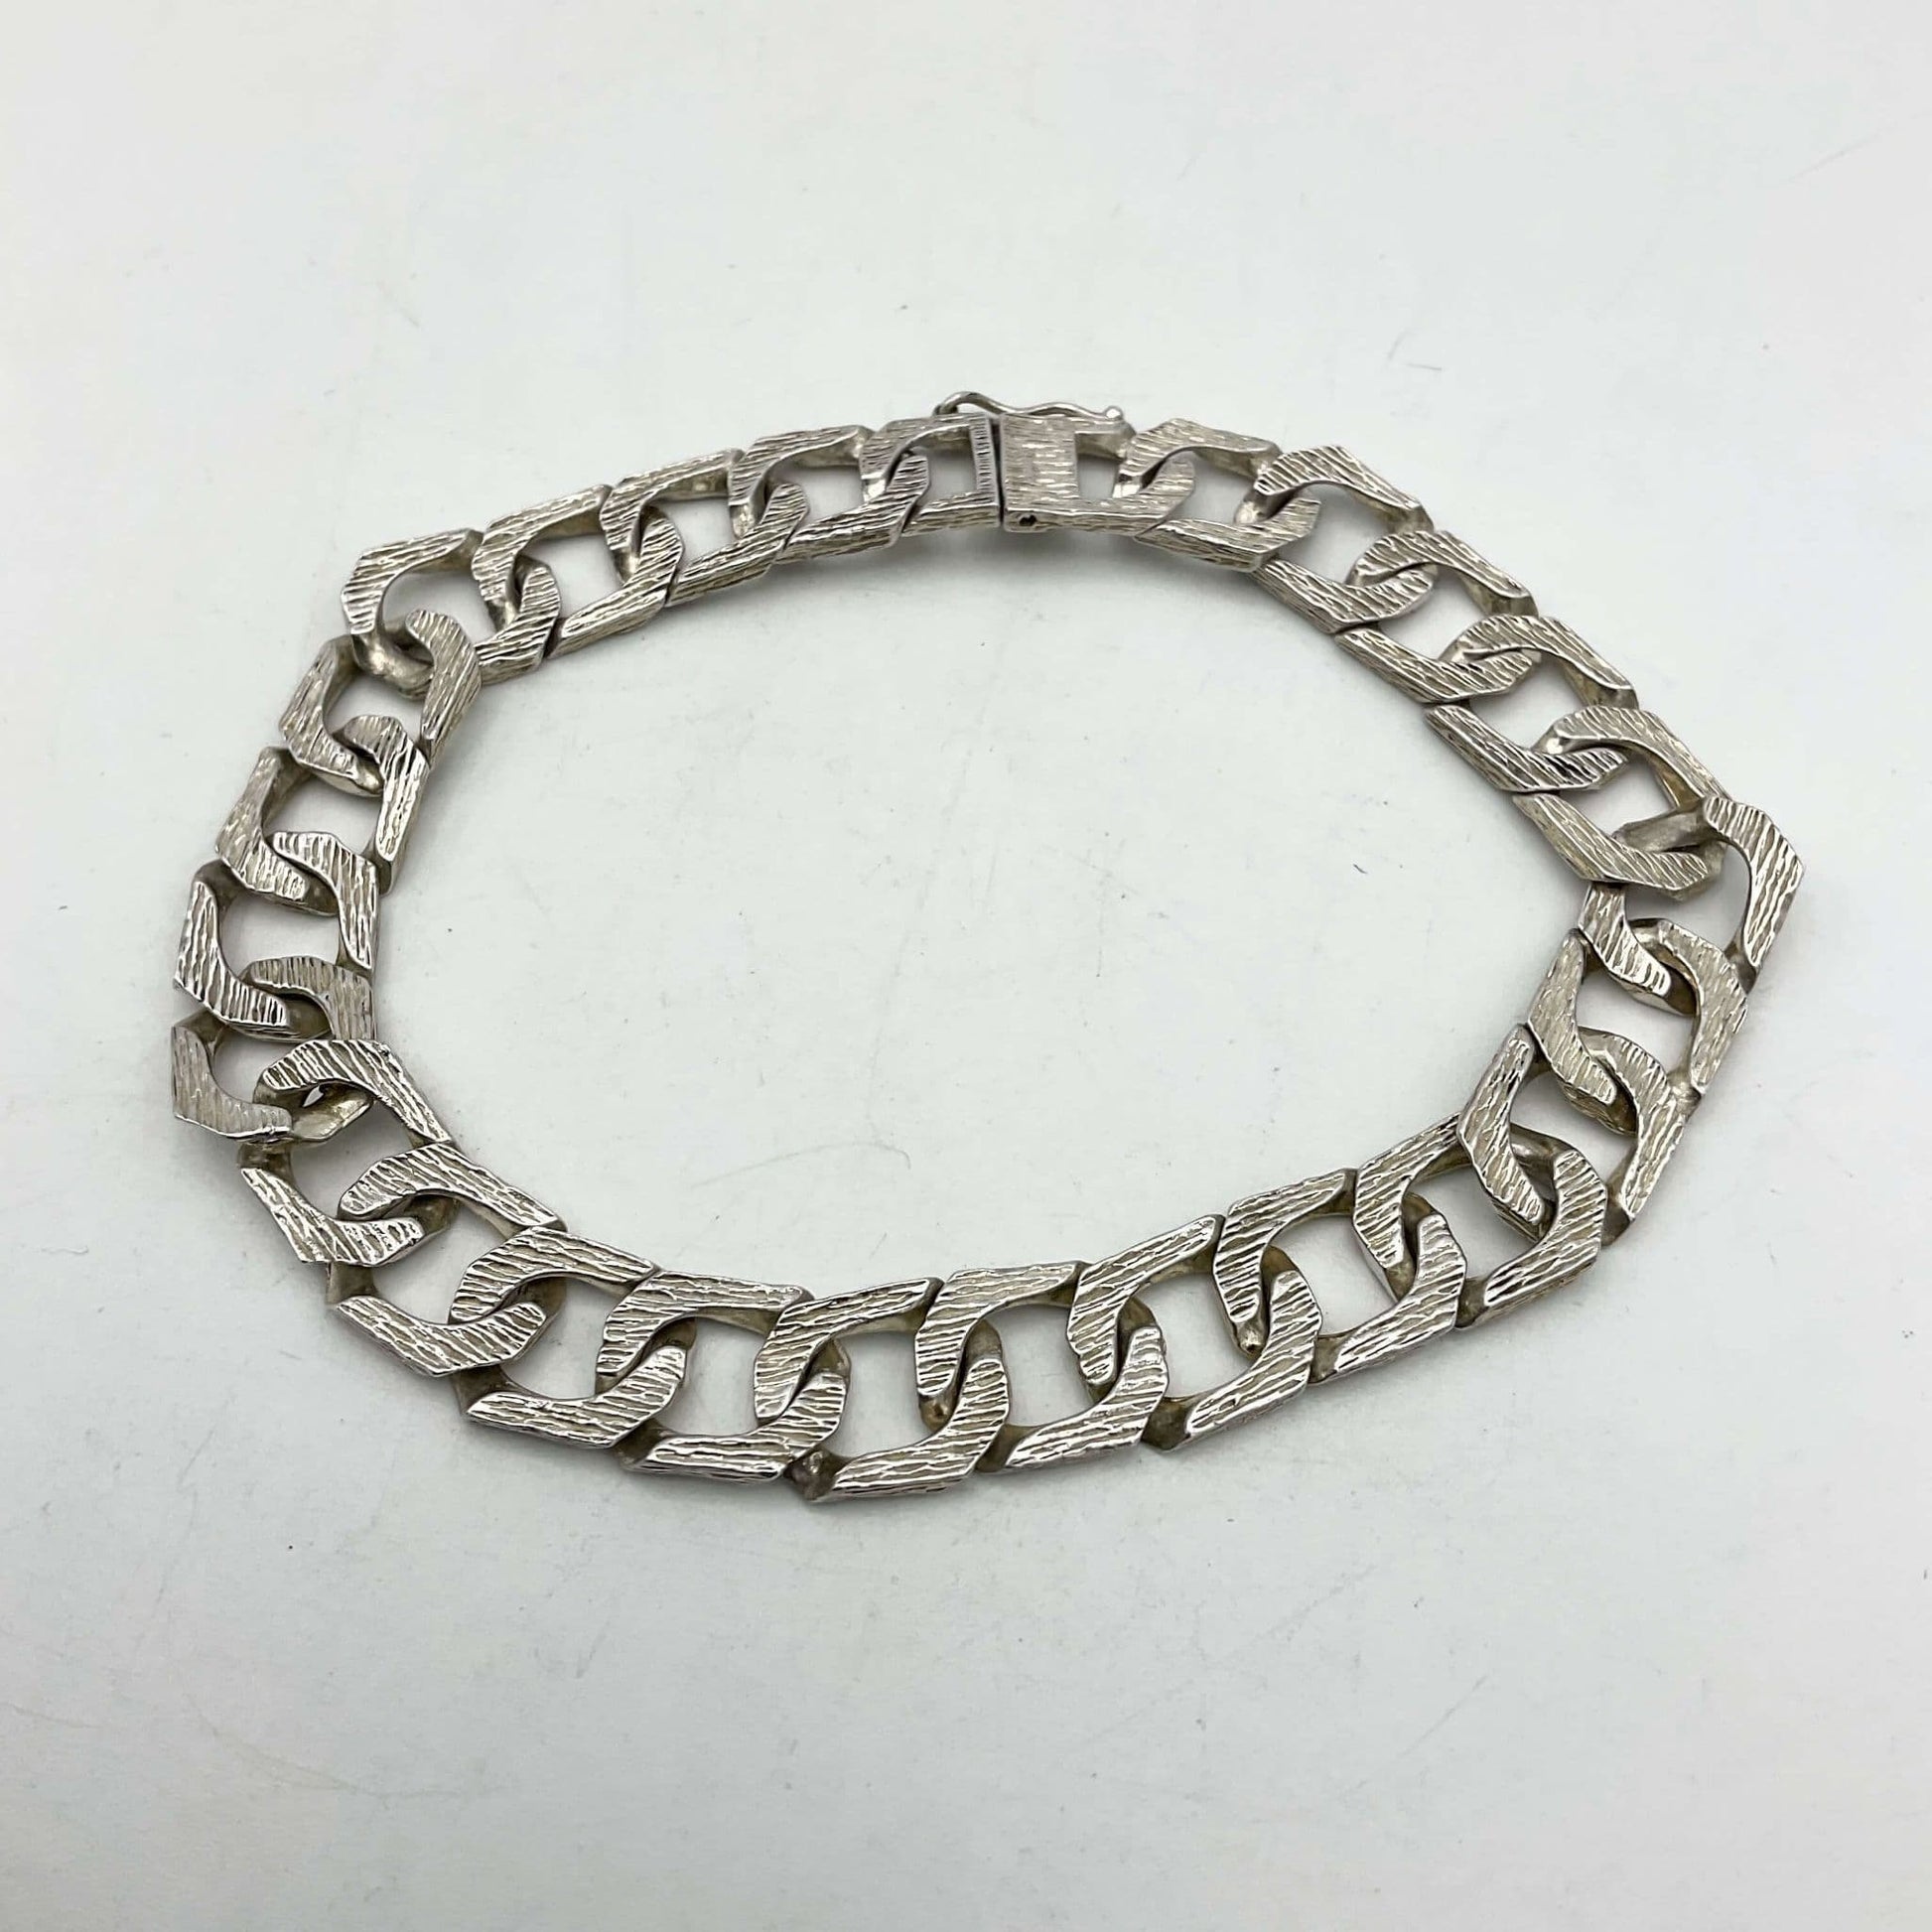 silver chain bracelet lying flat on a white background